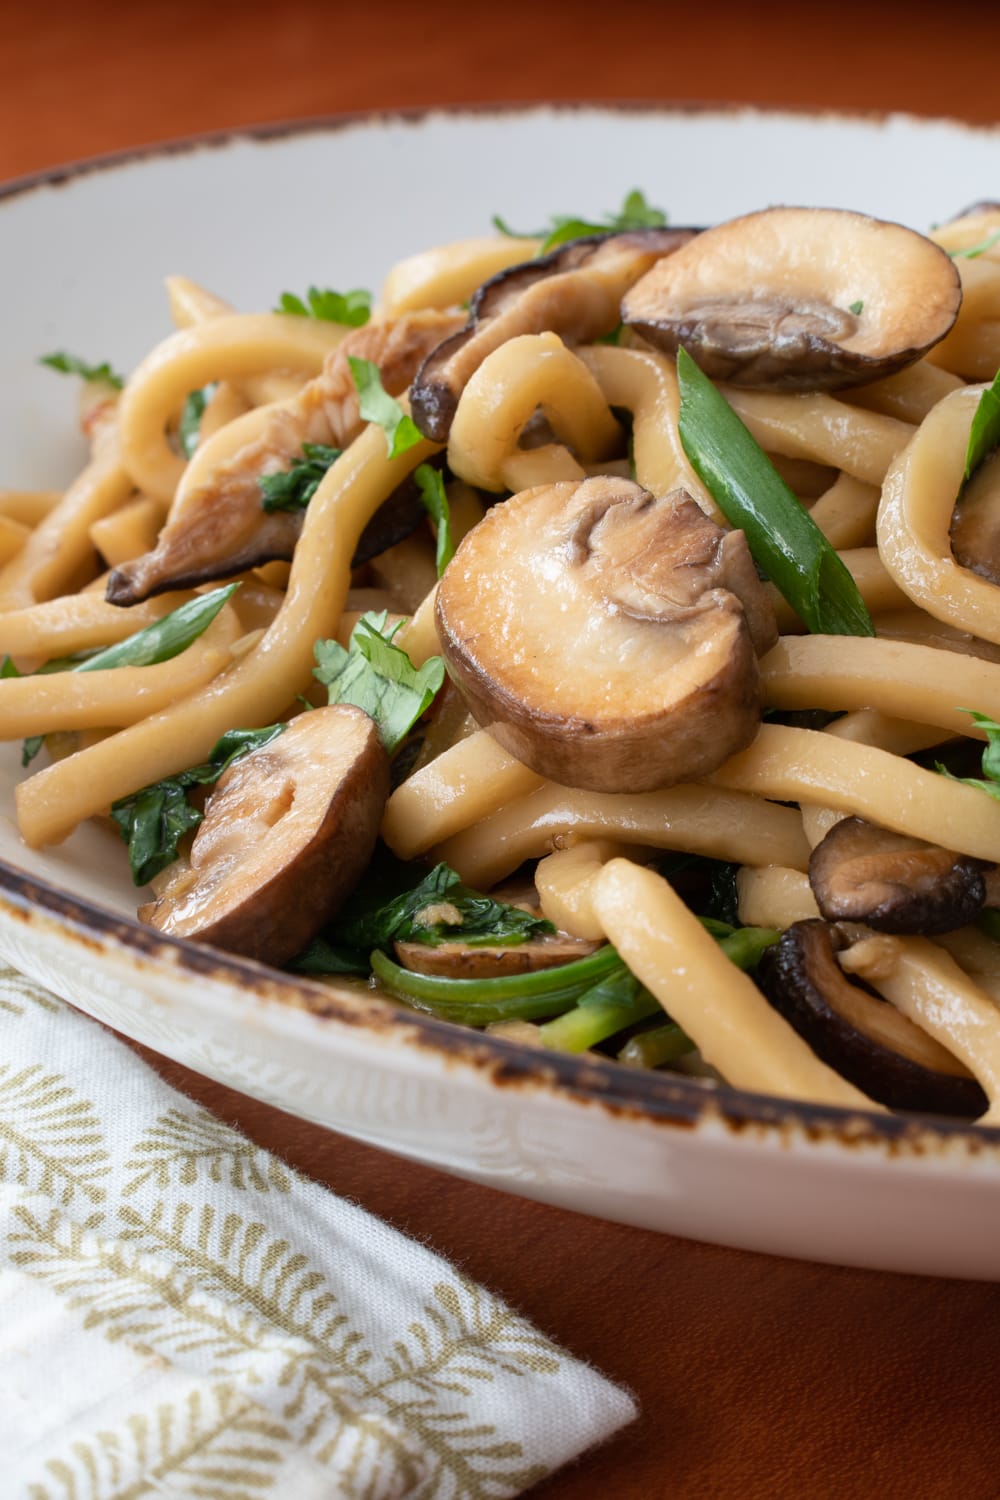 20-Minute Udon Noodle Stir Fry with Mushrooms - Bowl of Delicious